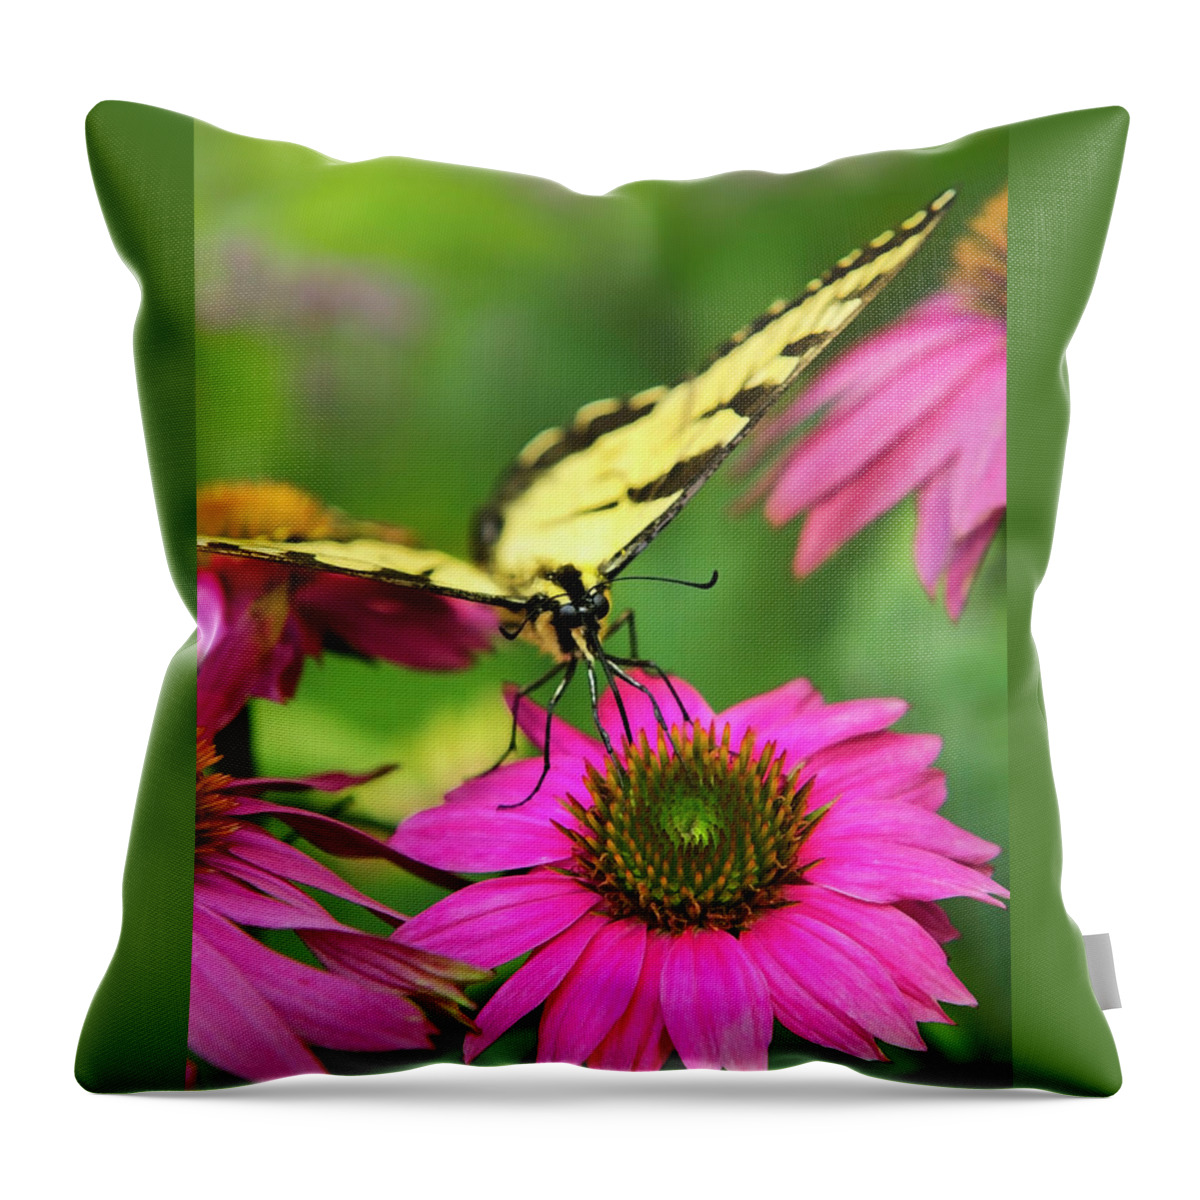 Butterflies Throw Pillow featuring the photograph Butterfly Savoring Pink Flowers by Christina Rollo